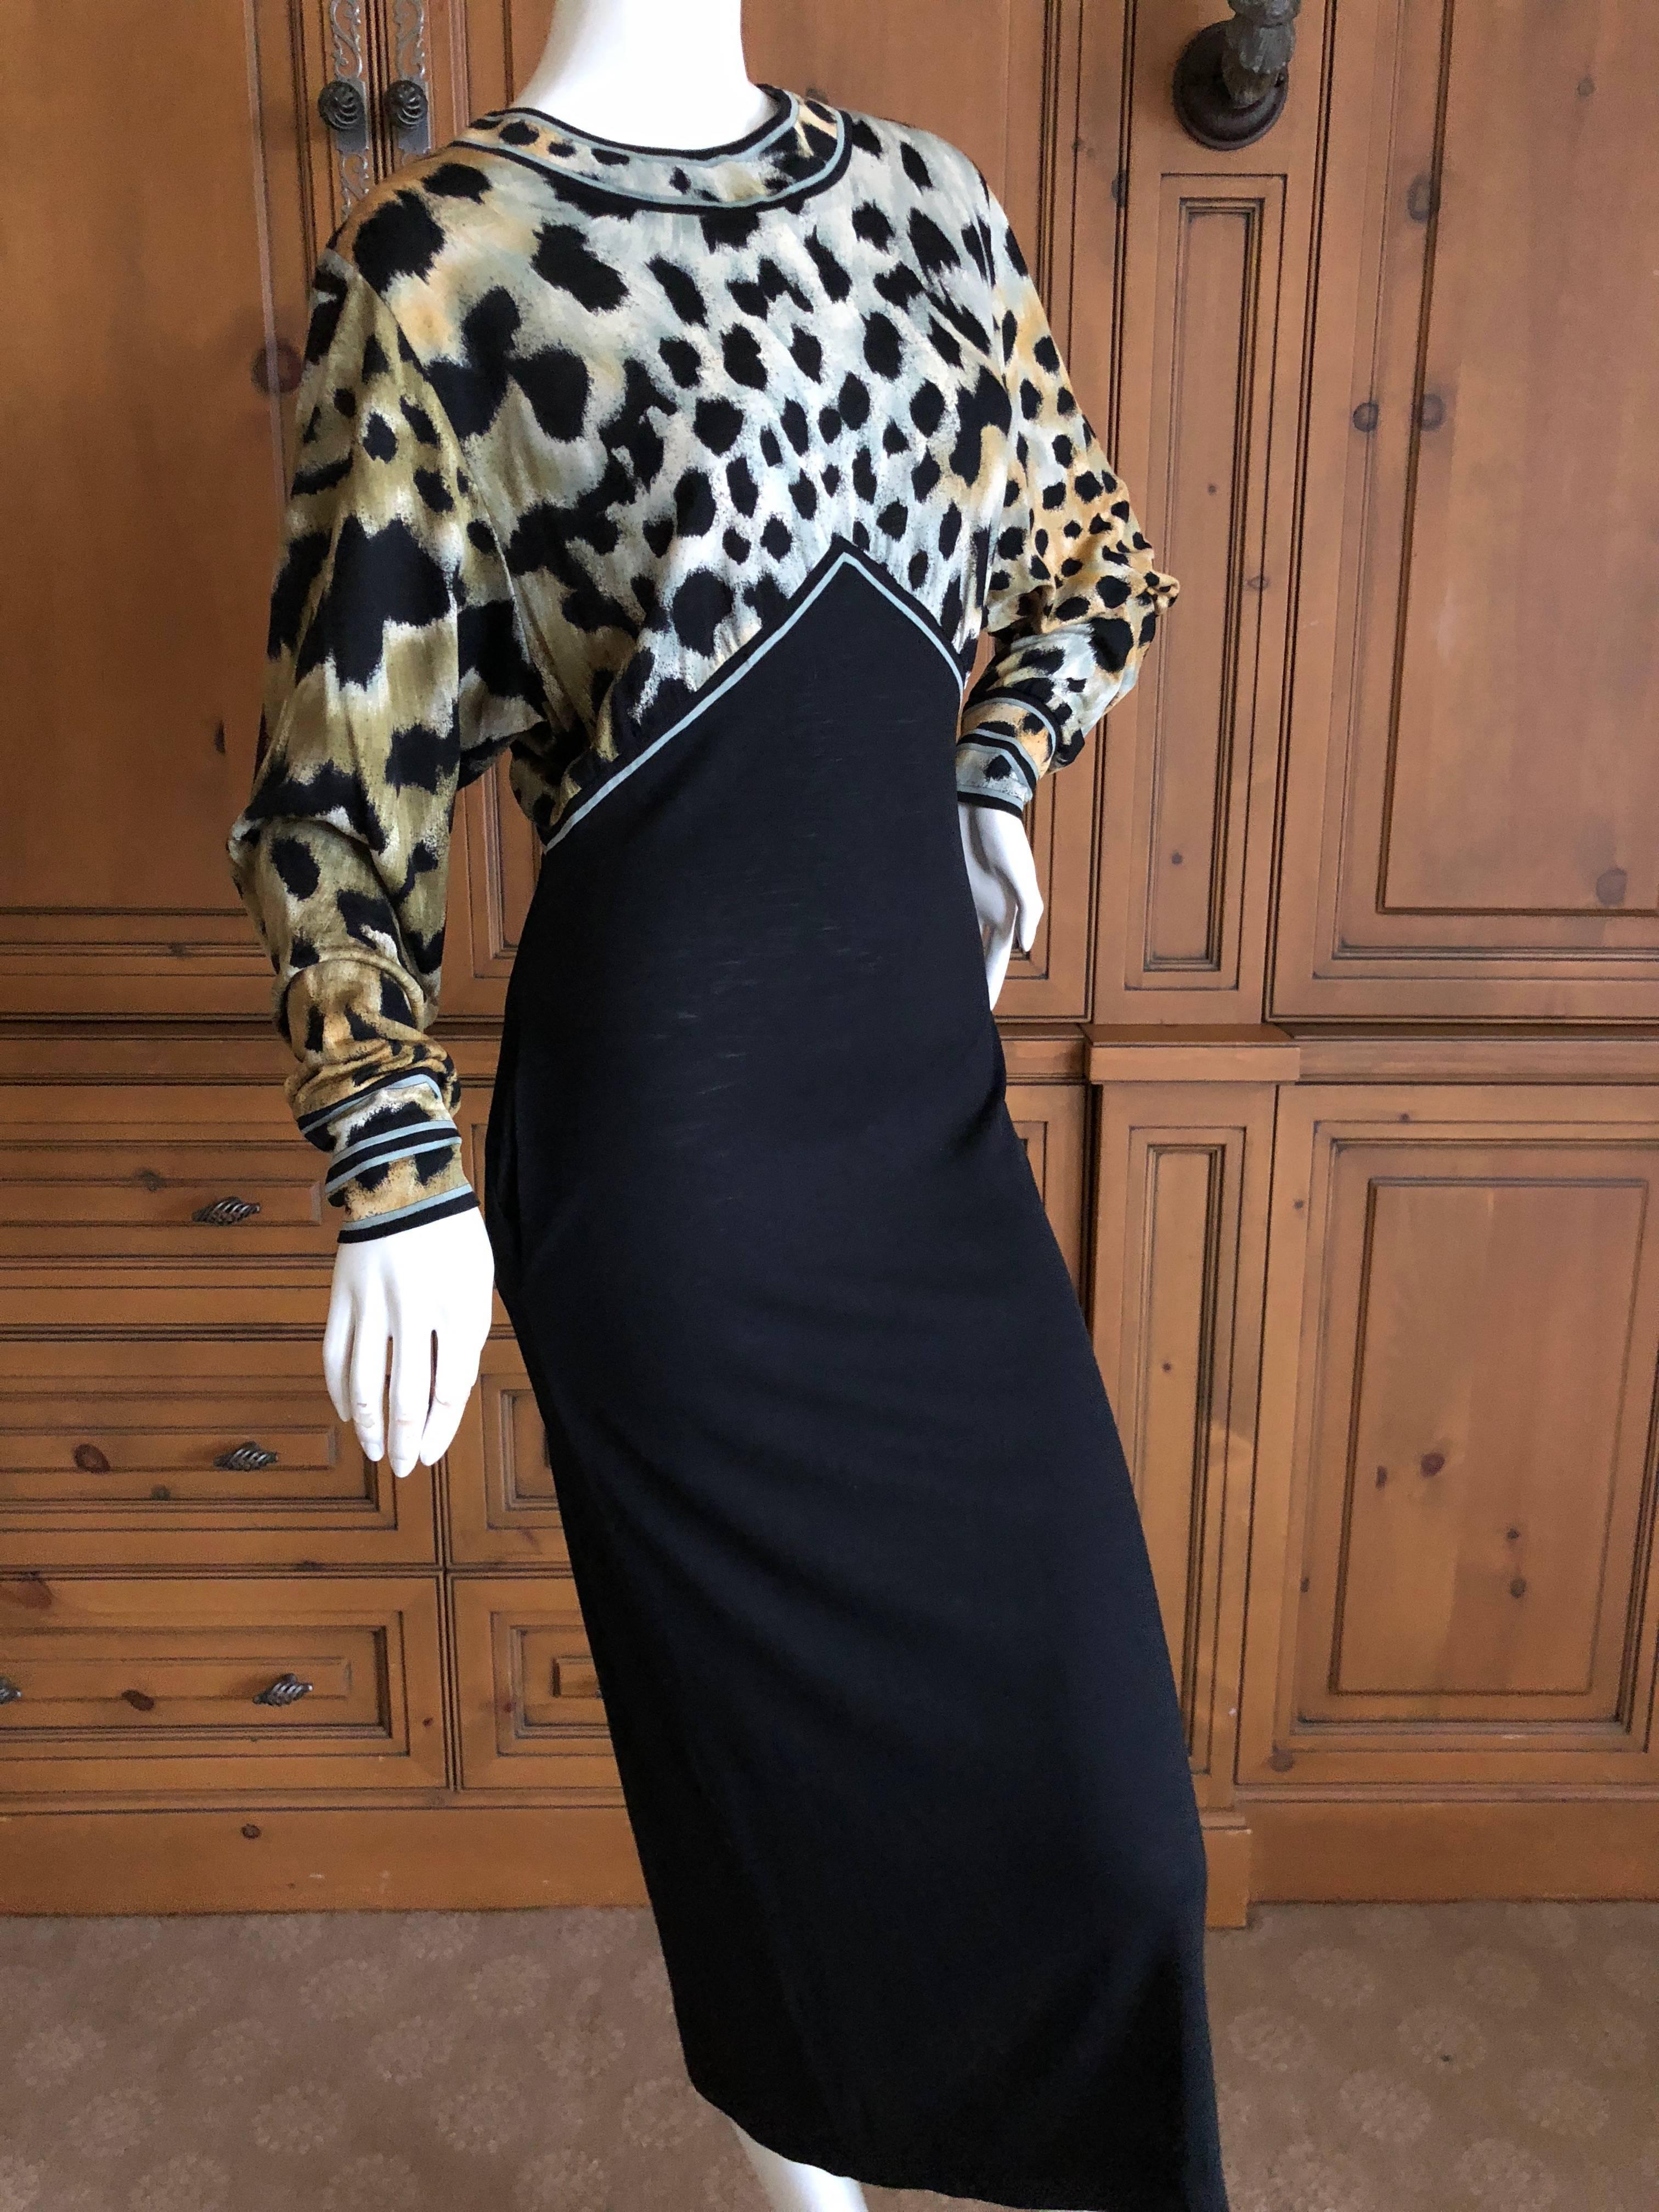 Leonard Paris for Bergdorf Goodman 1970's Wool / Silk Dress.
Leonard , Paris was a contemporary of Pucci, using silk jersey printed in their signature florals, Leonard was as expensive, if not more, than Pucci.
70 % wool 30% silk
Bust 38